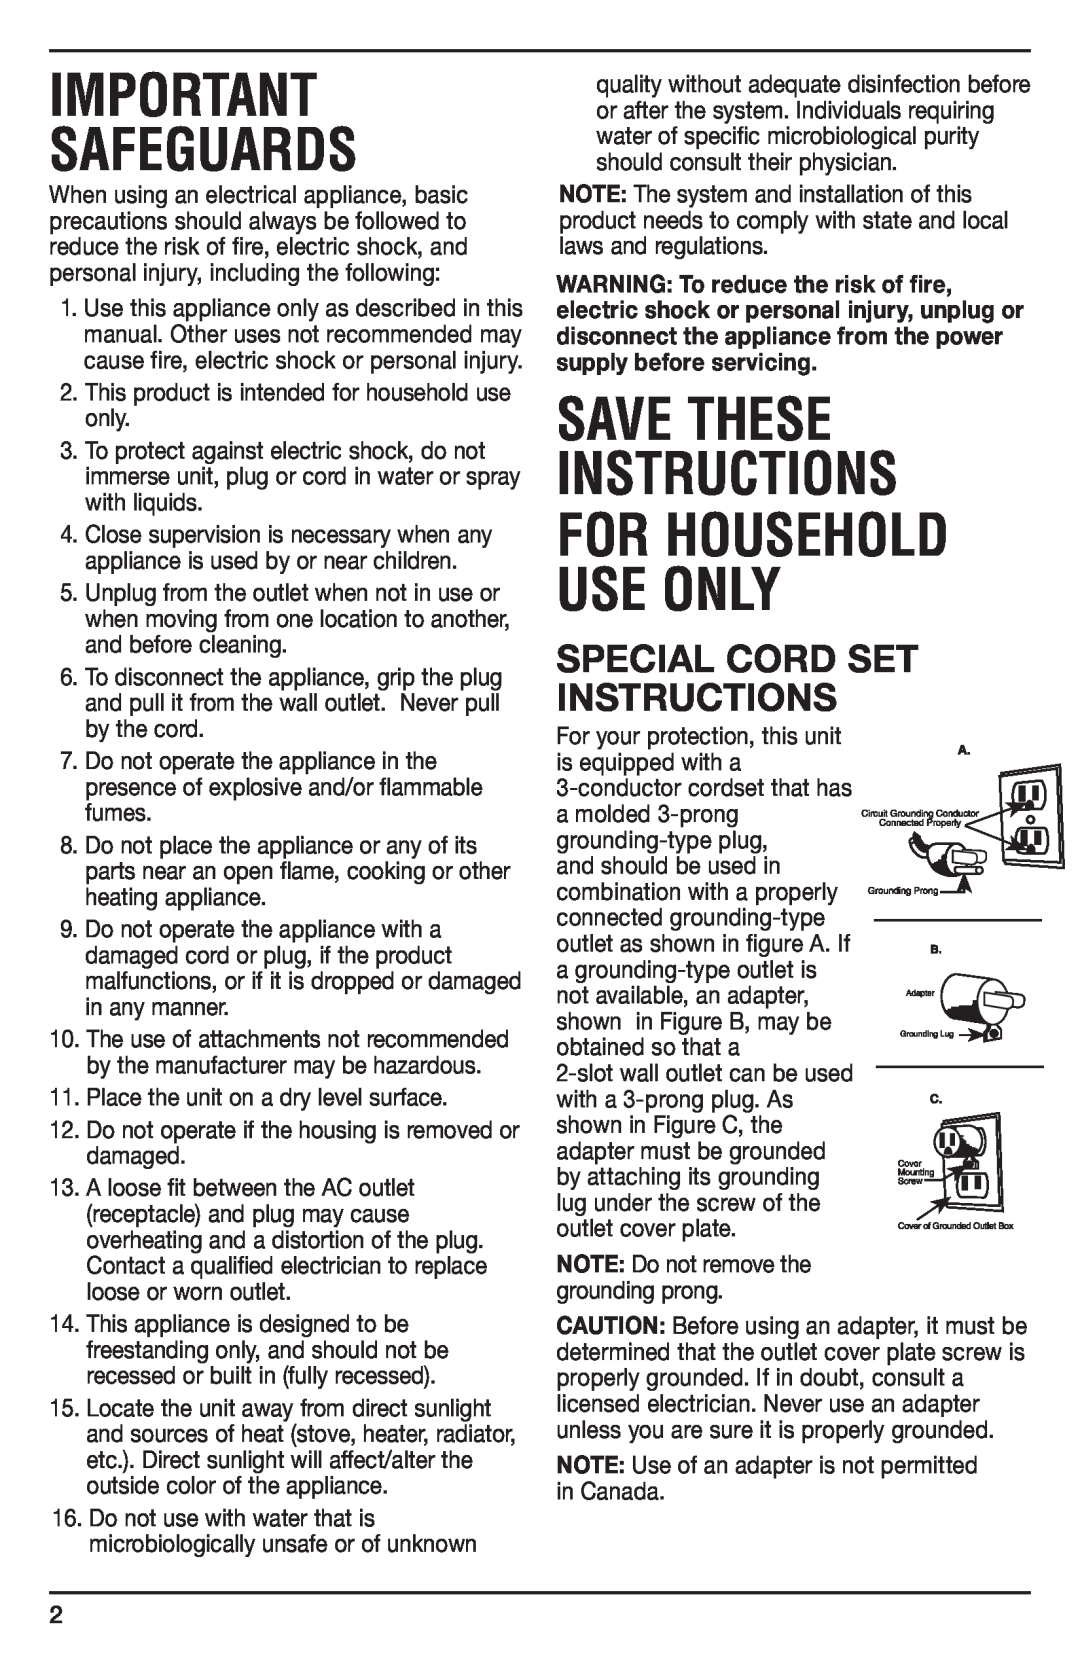 Cuisinart WCH-950 manual Special Cord Set Instructions, Safeguards, Save These Instructions For Household Use Only 